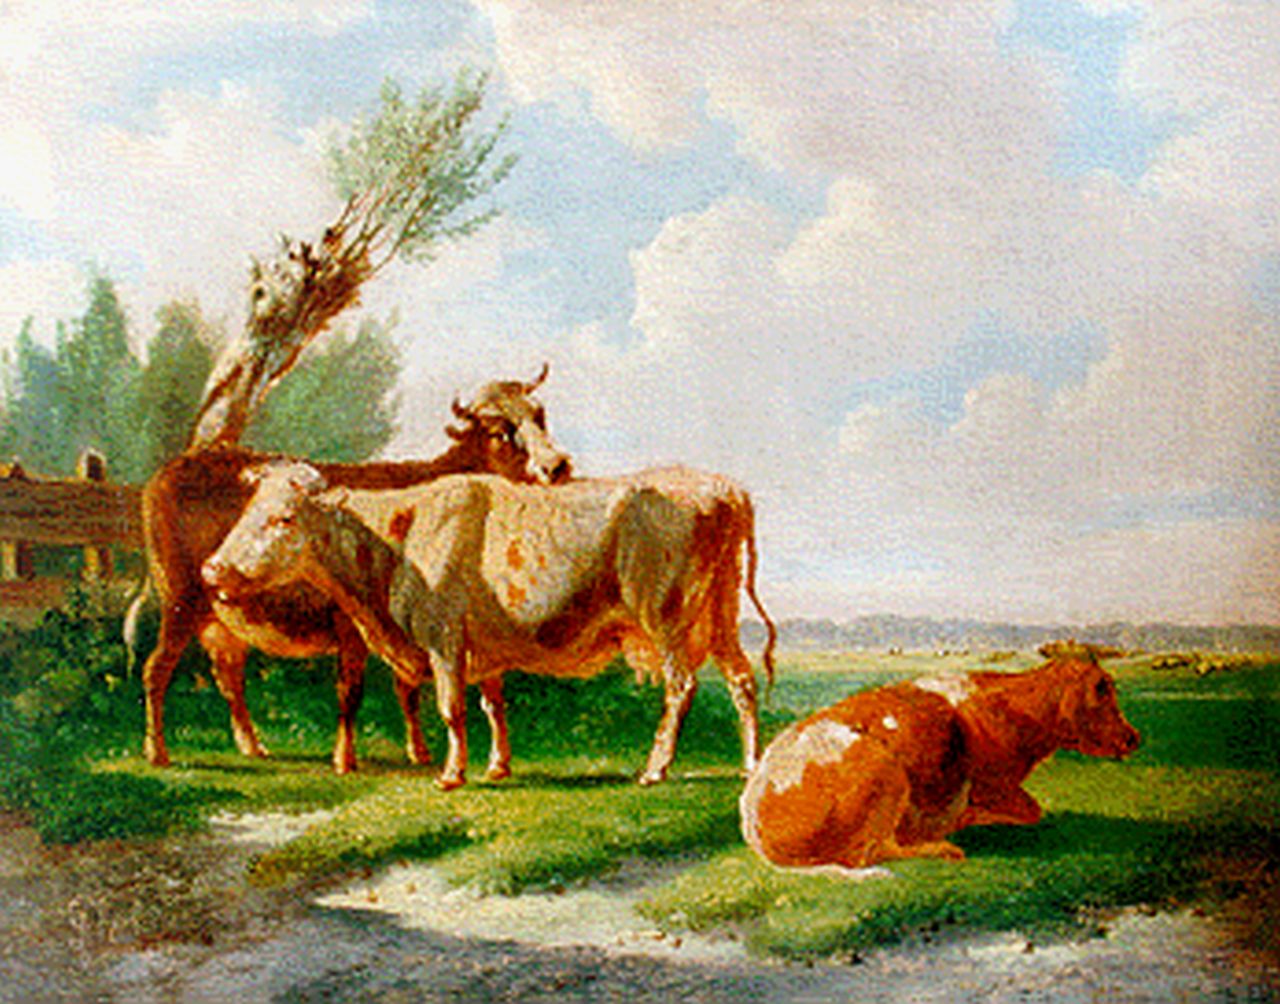 Verhoesen A.  | Albertus Verhoesen, Cattle in a meadow, oil on panel 13.0 x 16.7 cm, signed l.l. and dated 1869